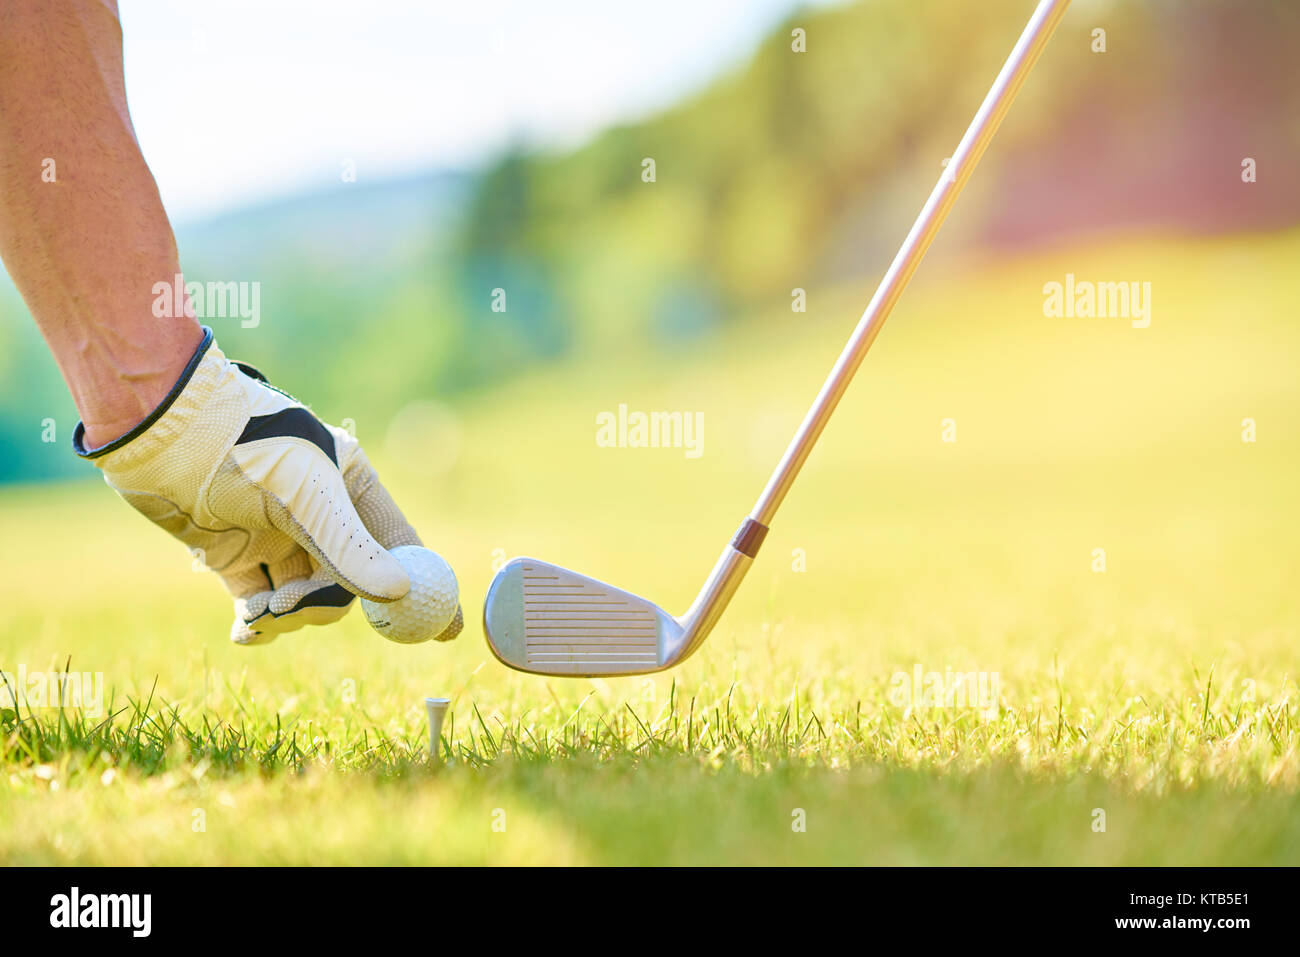 Young person playing golf on a sunny day Stock Photo